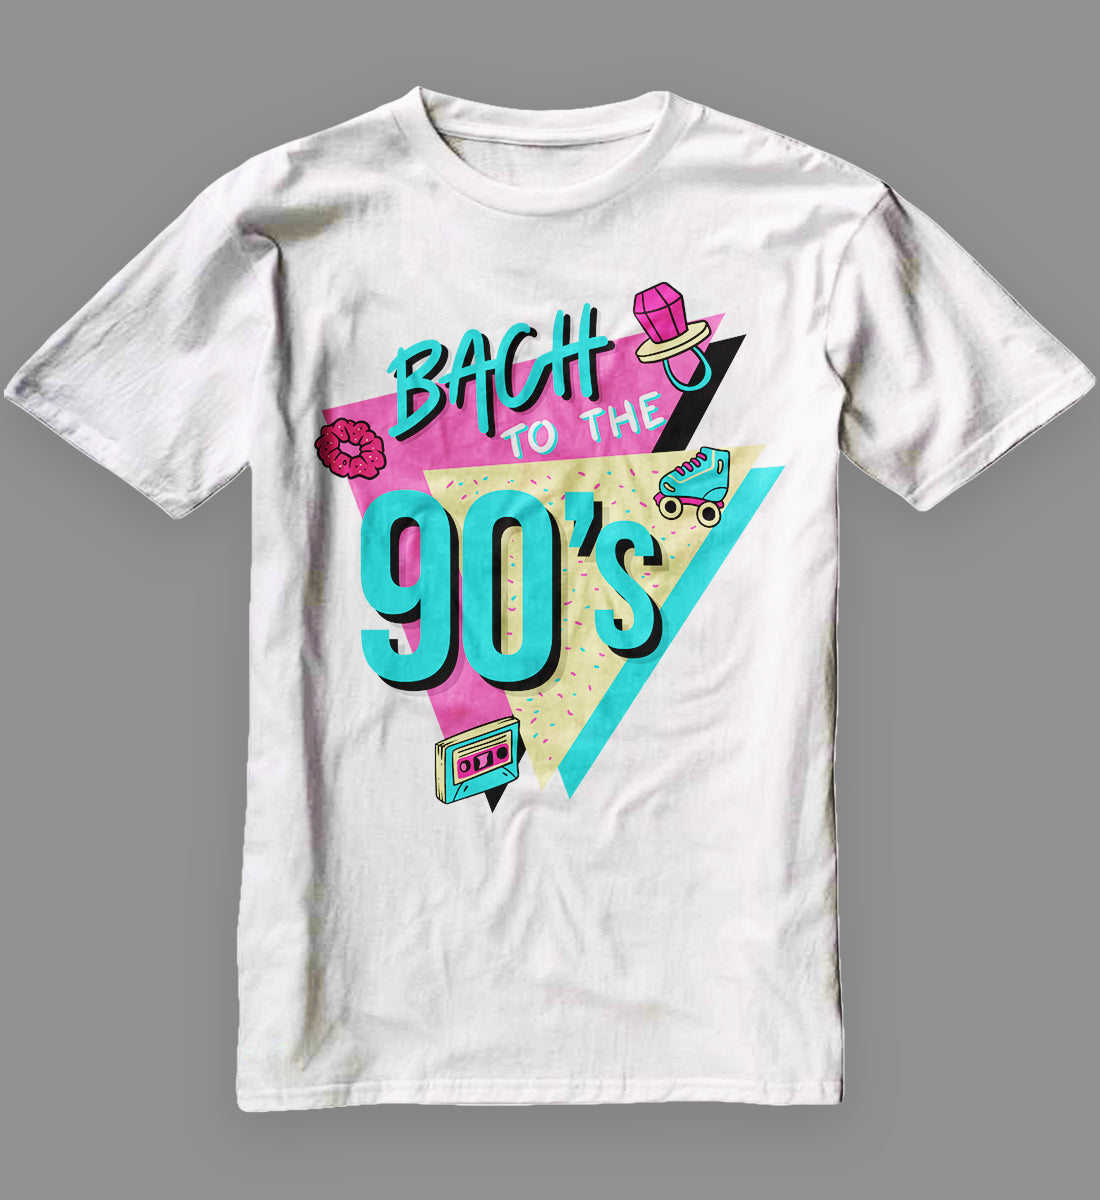 Bach to the 90s Shirt